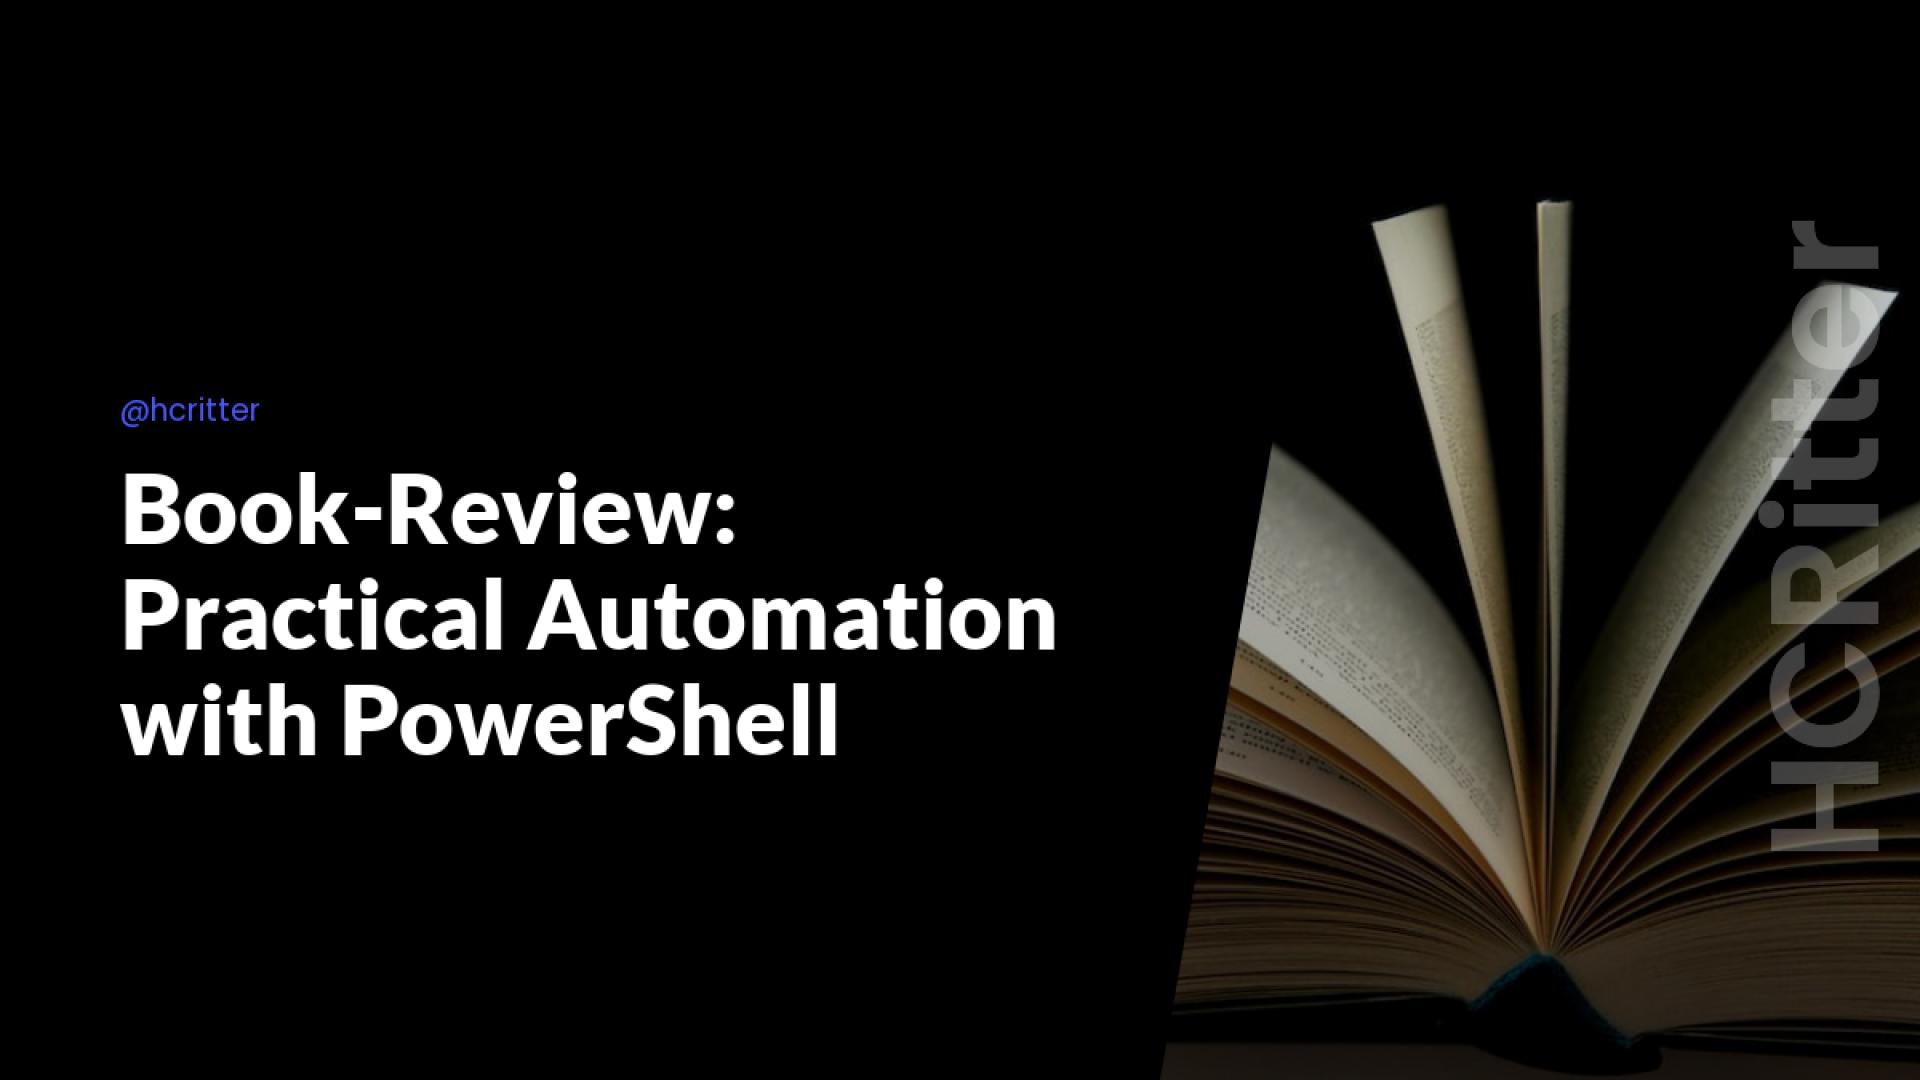 Book-Review: Practical Automation with PowerShell